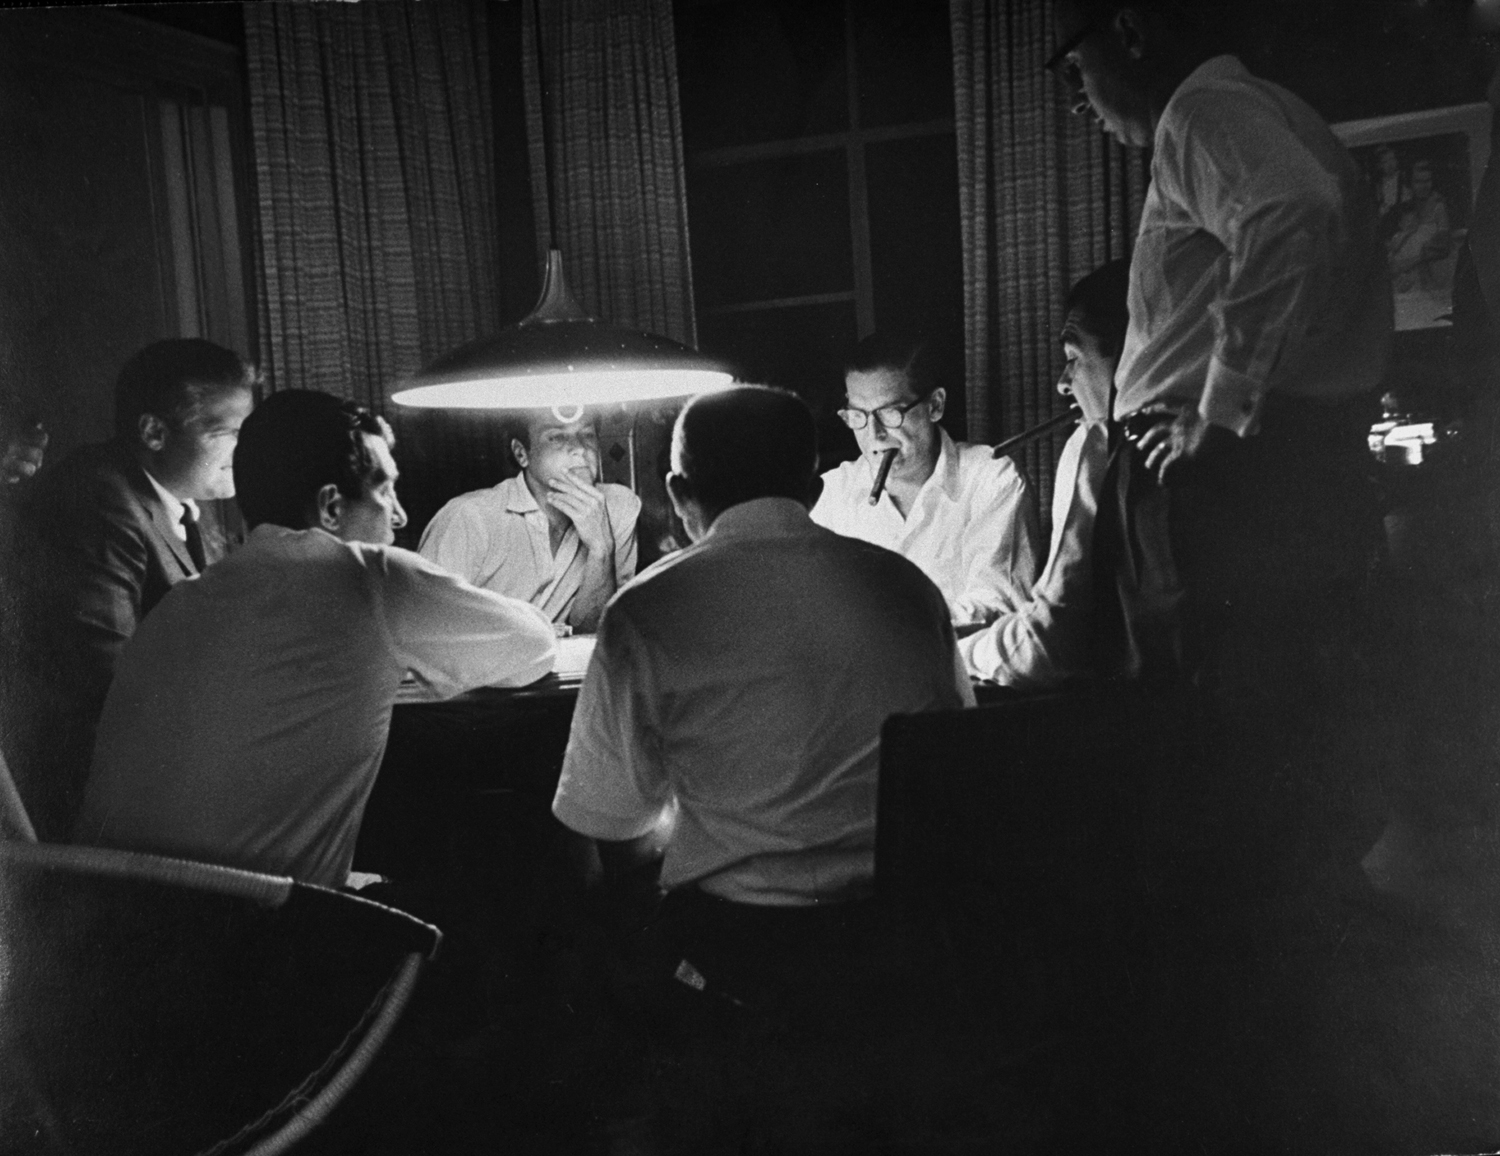 Poker pals in a table stakes game at Martin's home include (clockwise from Dean at left) agent Jerry Gershwin, Tony Curtis, Milton Berle, Ernie Kovacs with 85-cent cigar, director Billy Wilder.